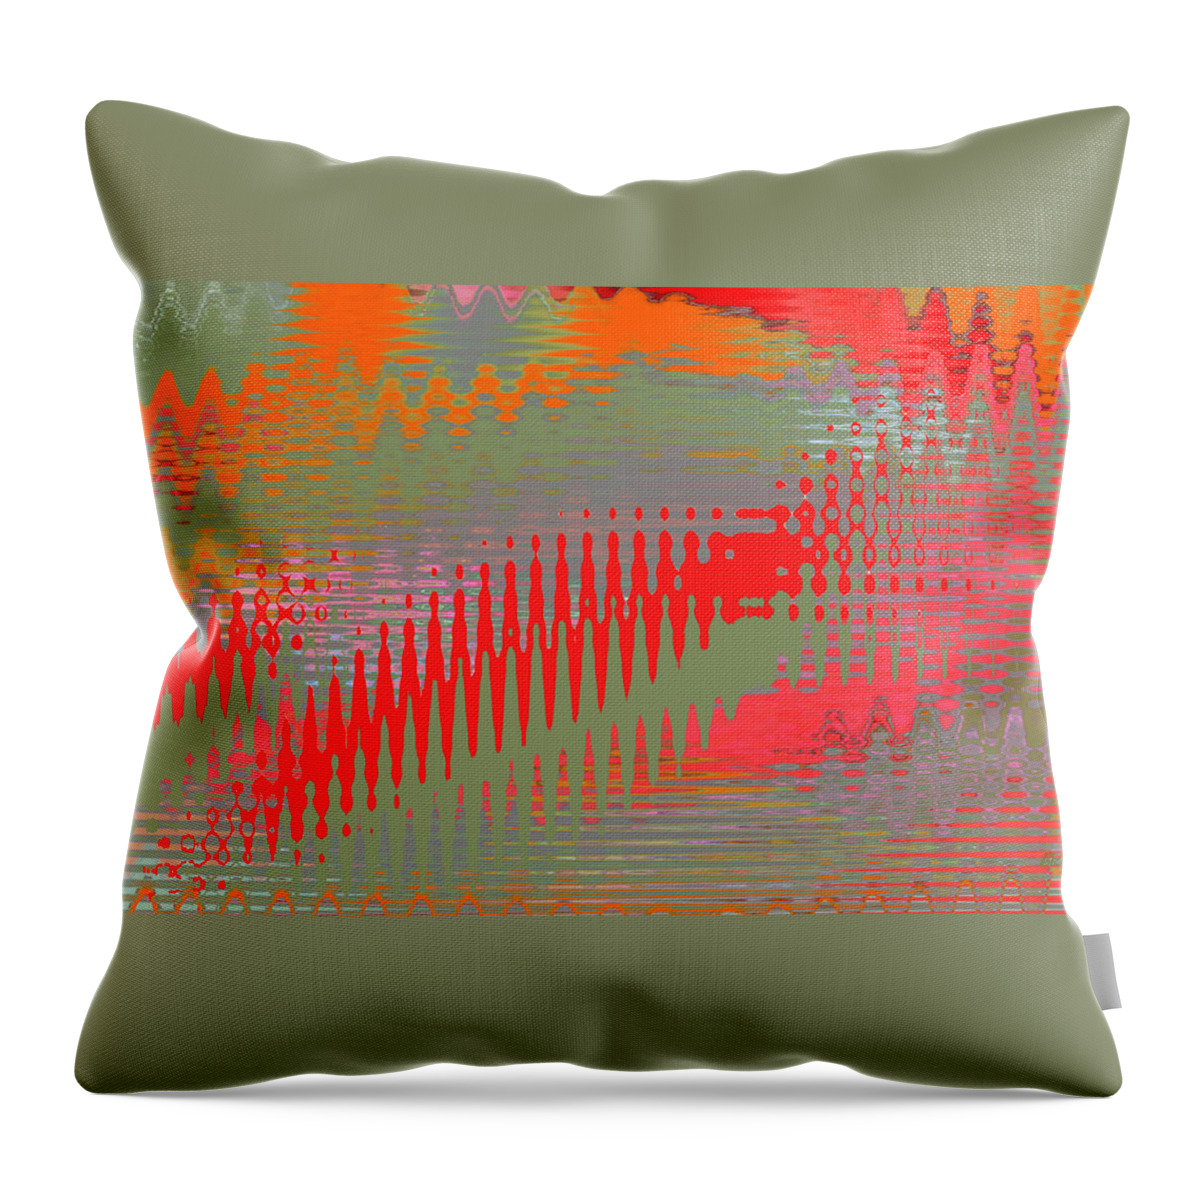 Multicolored Abstract Throw Pillow featuring the digital art Pond Abstract - Summer Colors by Ben and Raisa Gertsberg